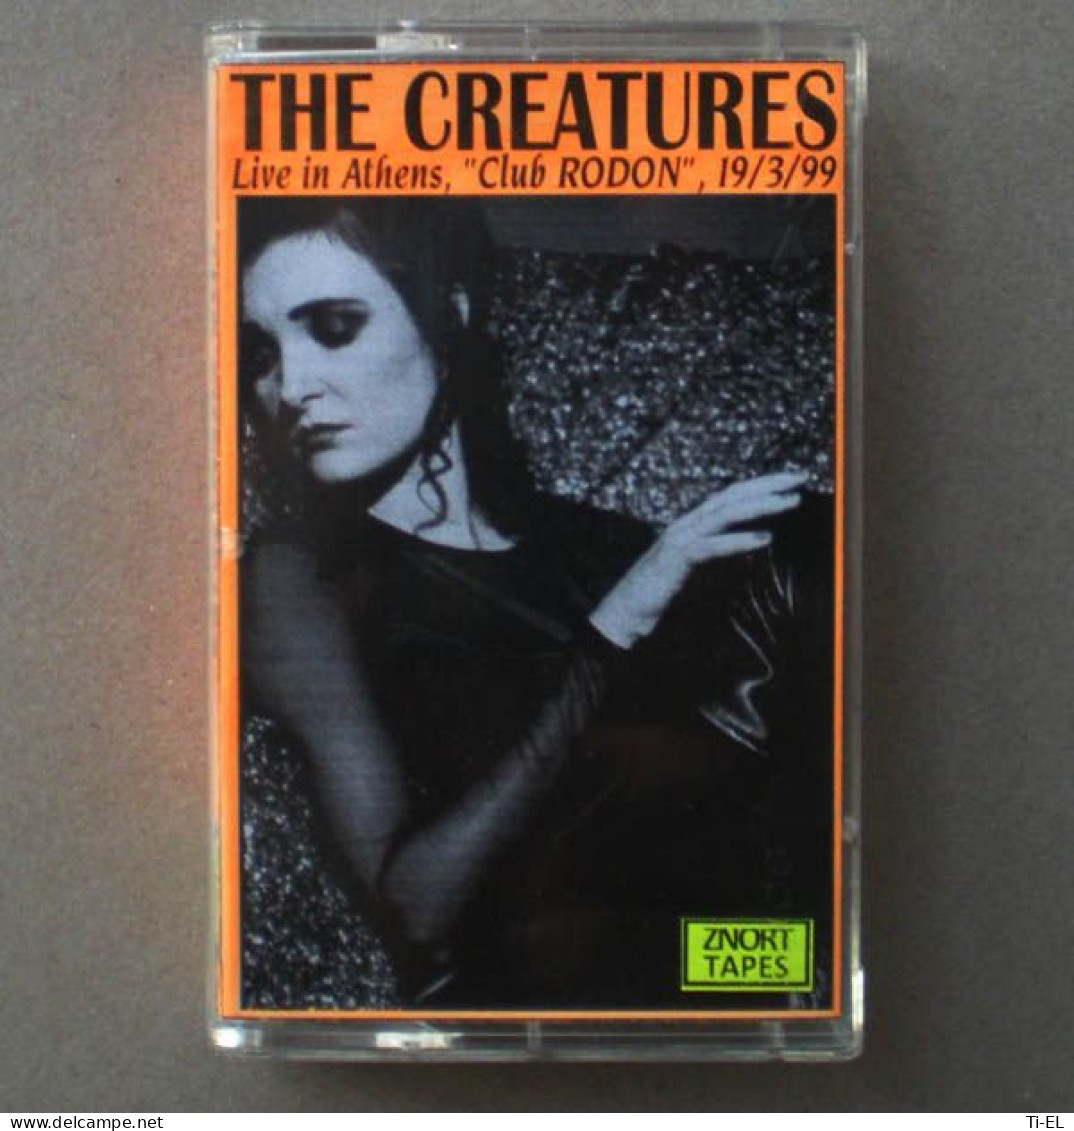 THE CREATURES – Live In Athens, "Club RODON" 19/3/1999 | Rare Audio Tape - Cassette